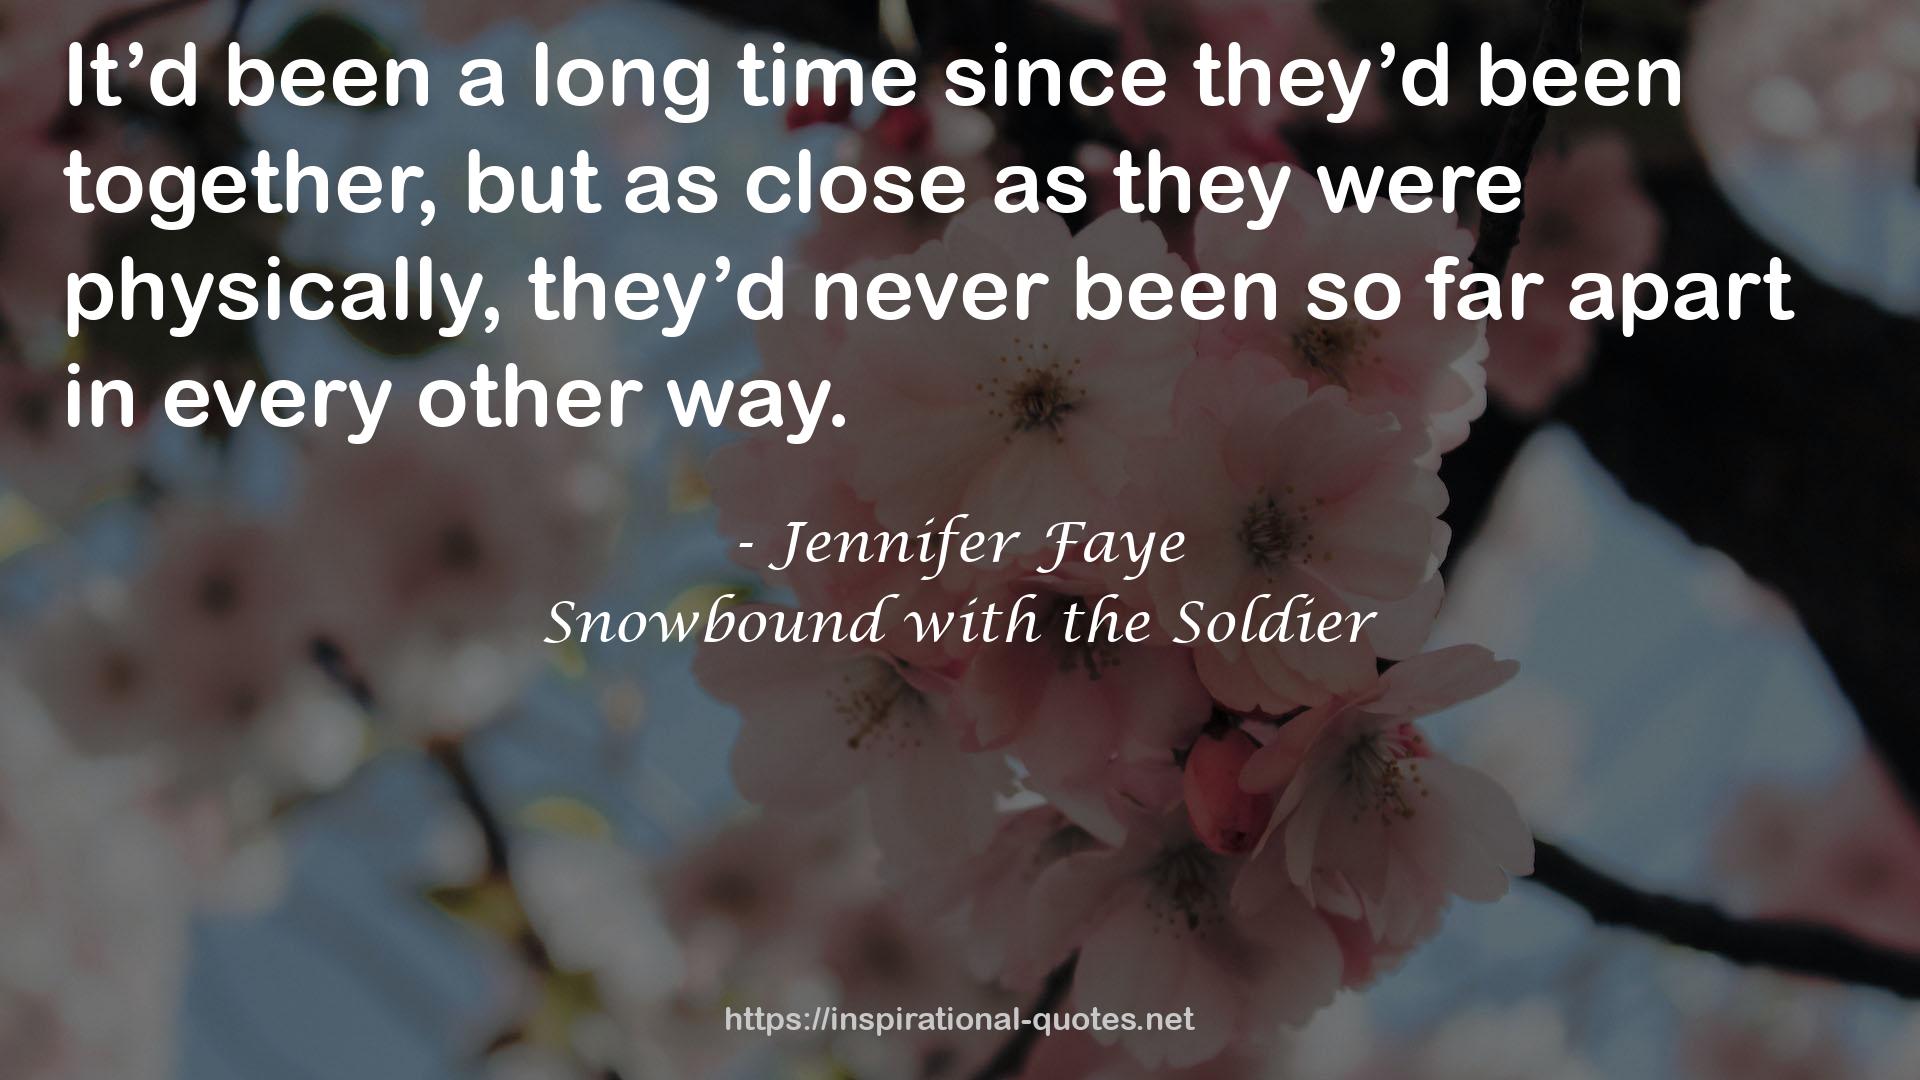 Snowbound with the Soldier QUOTES